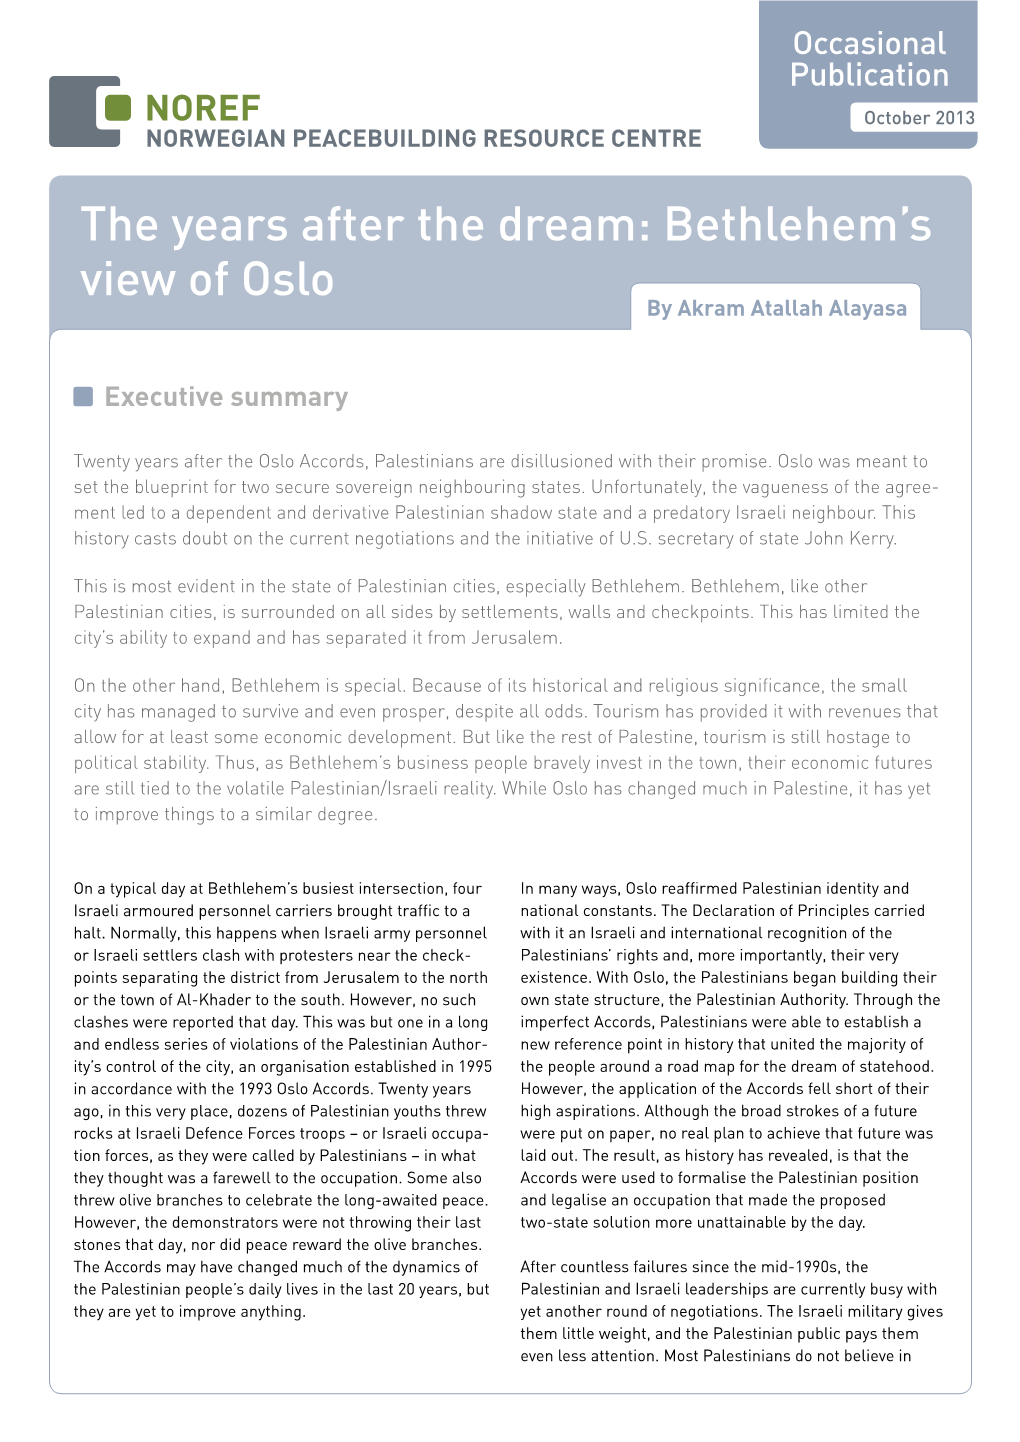 The Years After the Dream: Bethlehem's View of Oslo